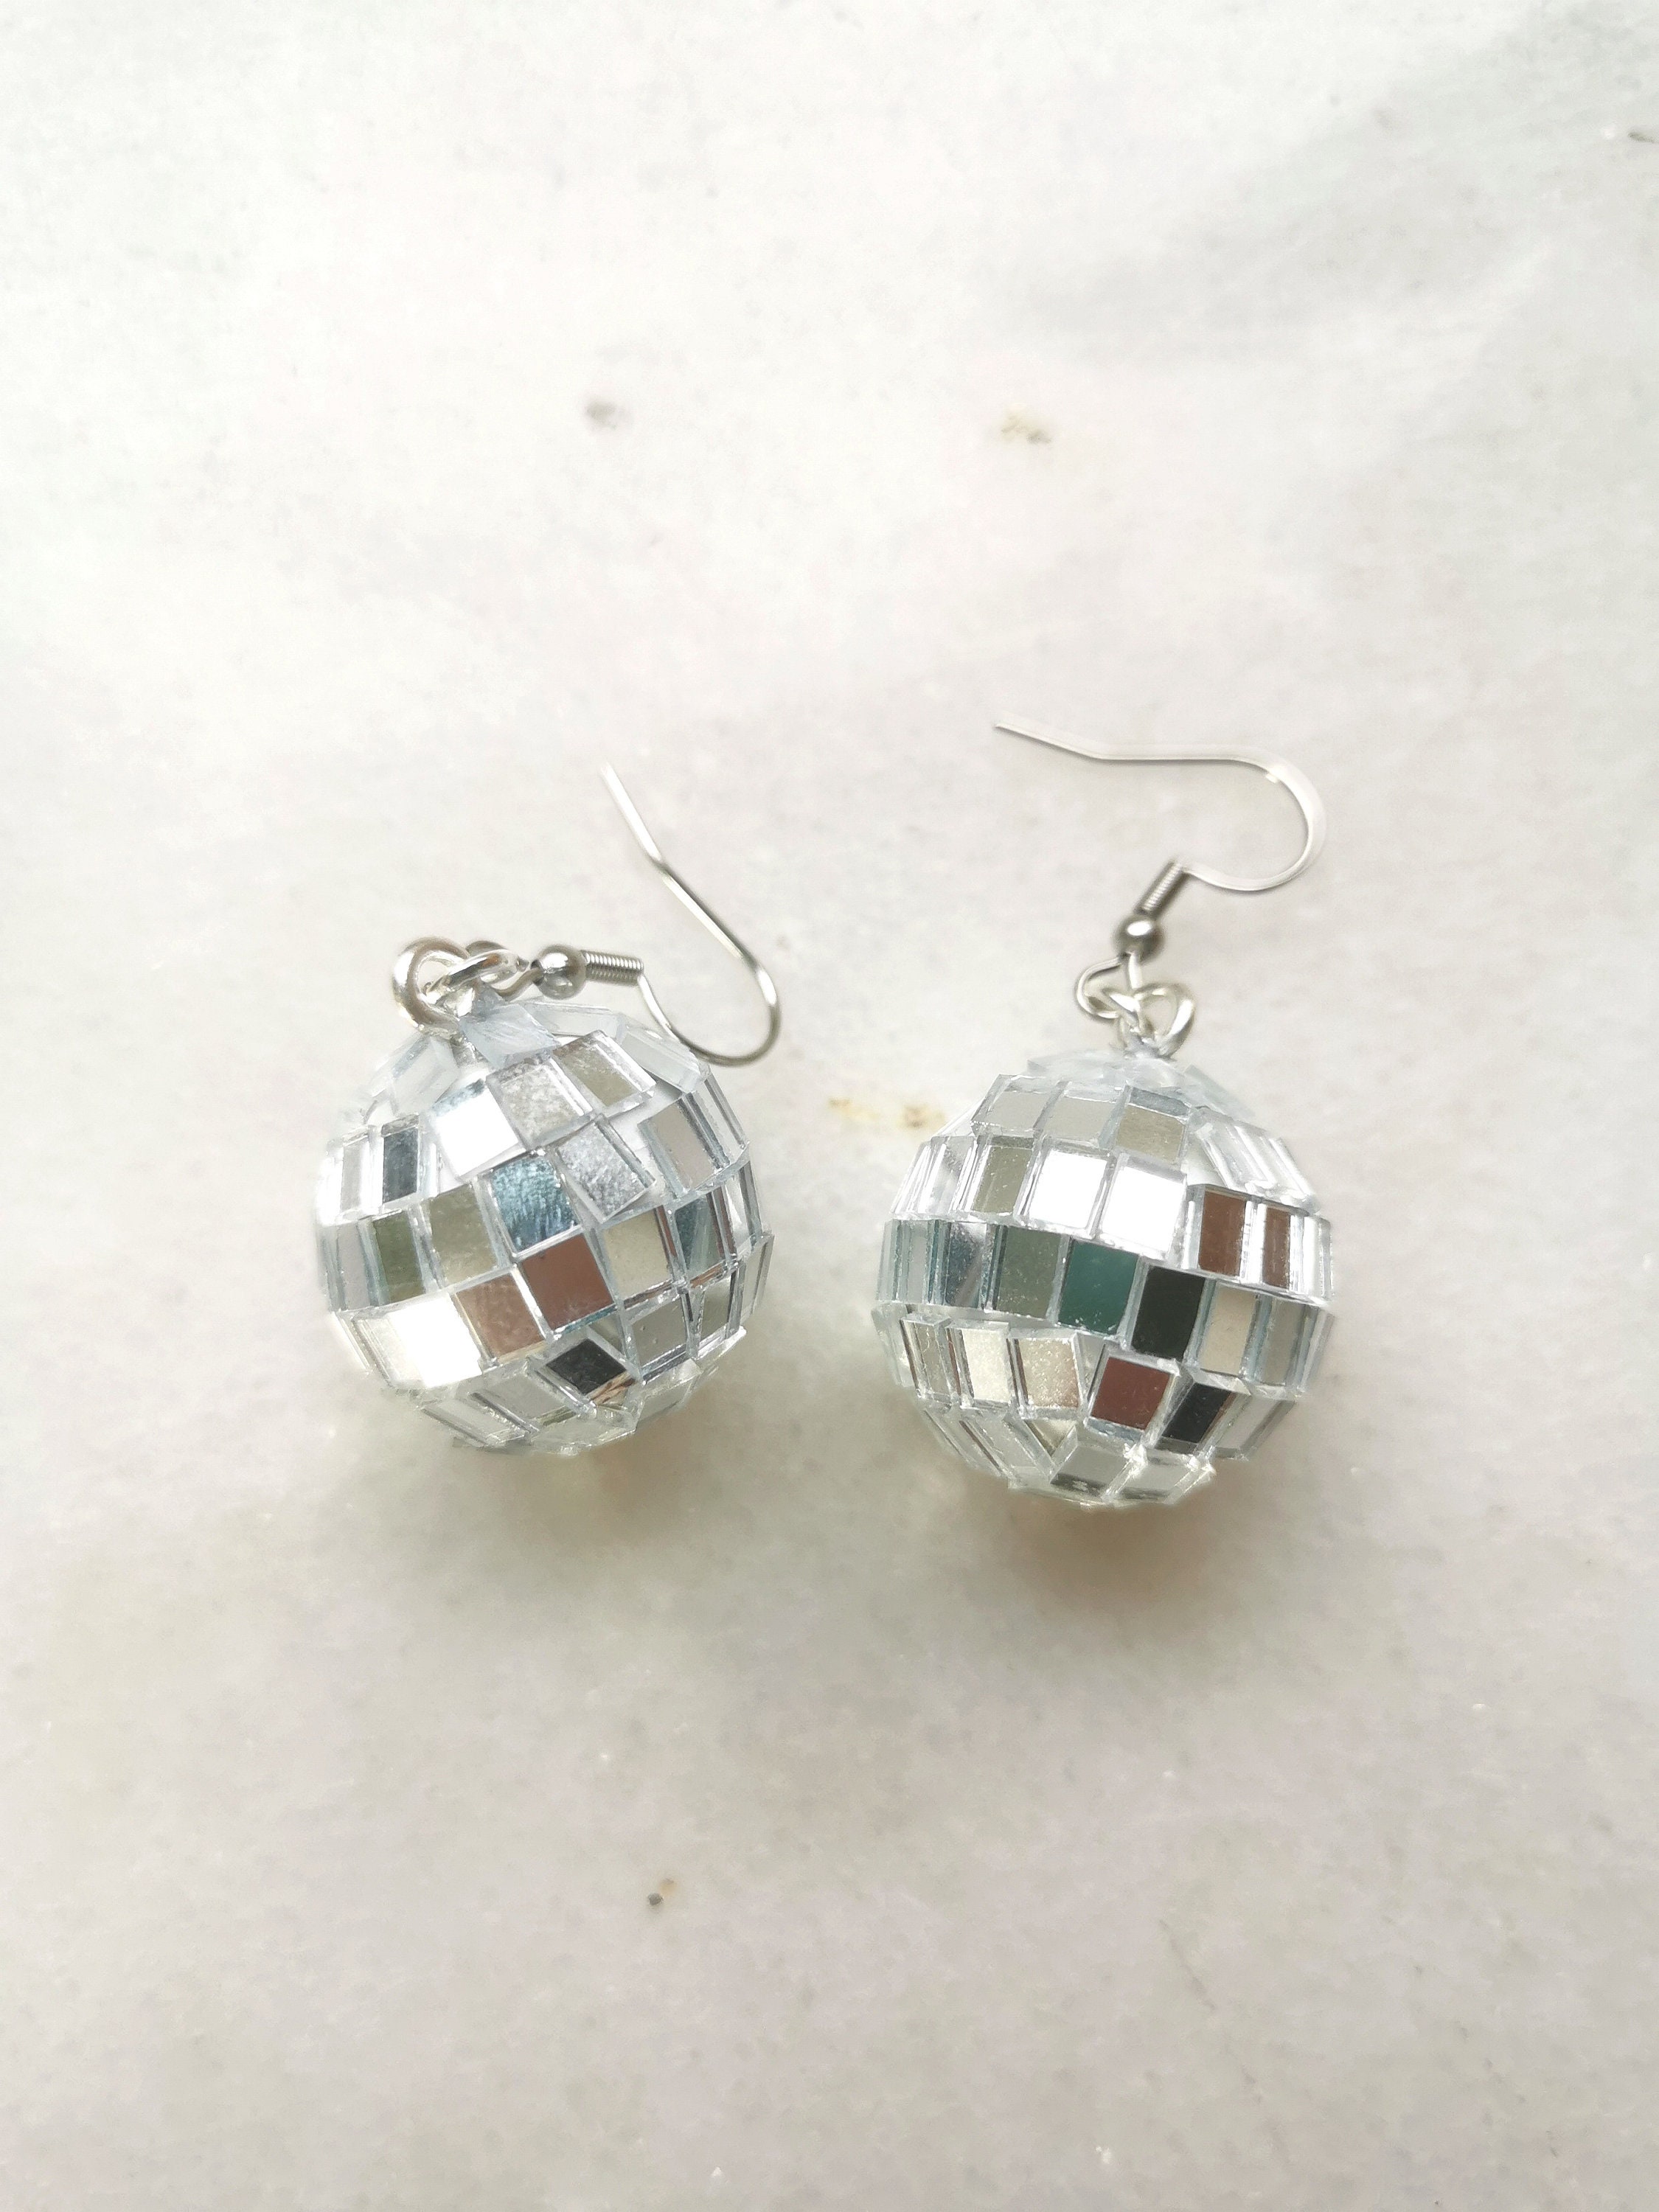 Disco Ball Charm, Stanley Cup Accessories - Harbor to Gulf Sparkly Silver